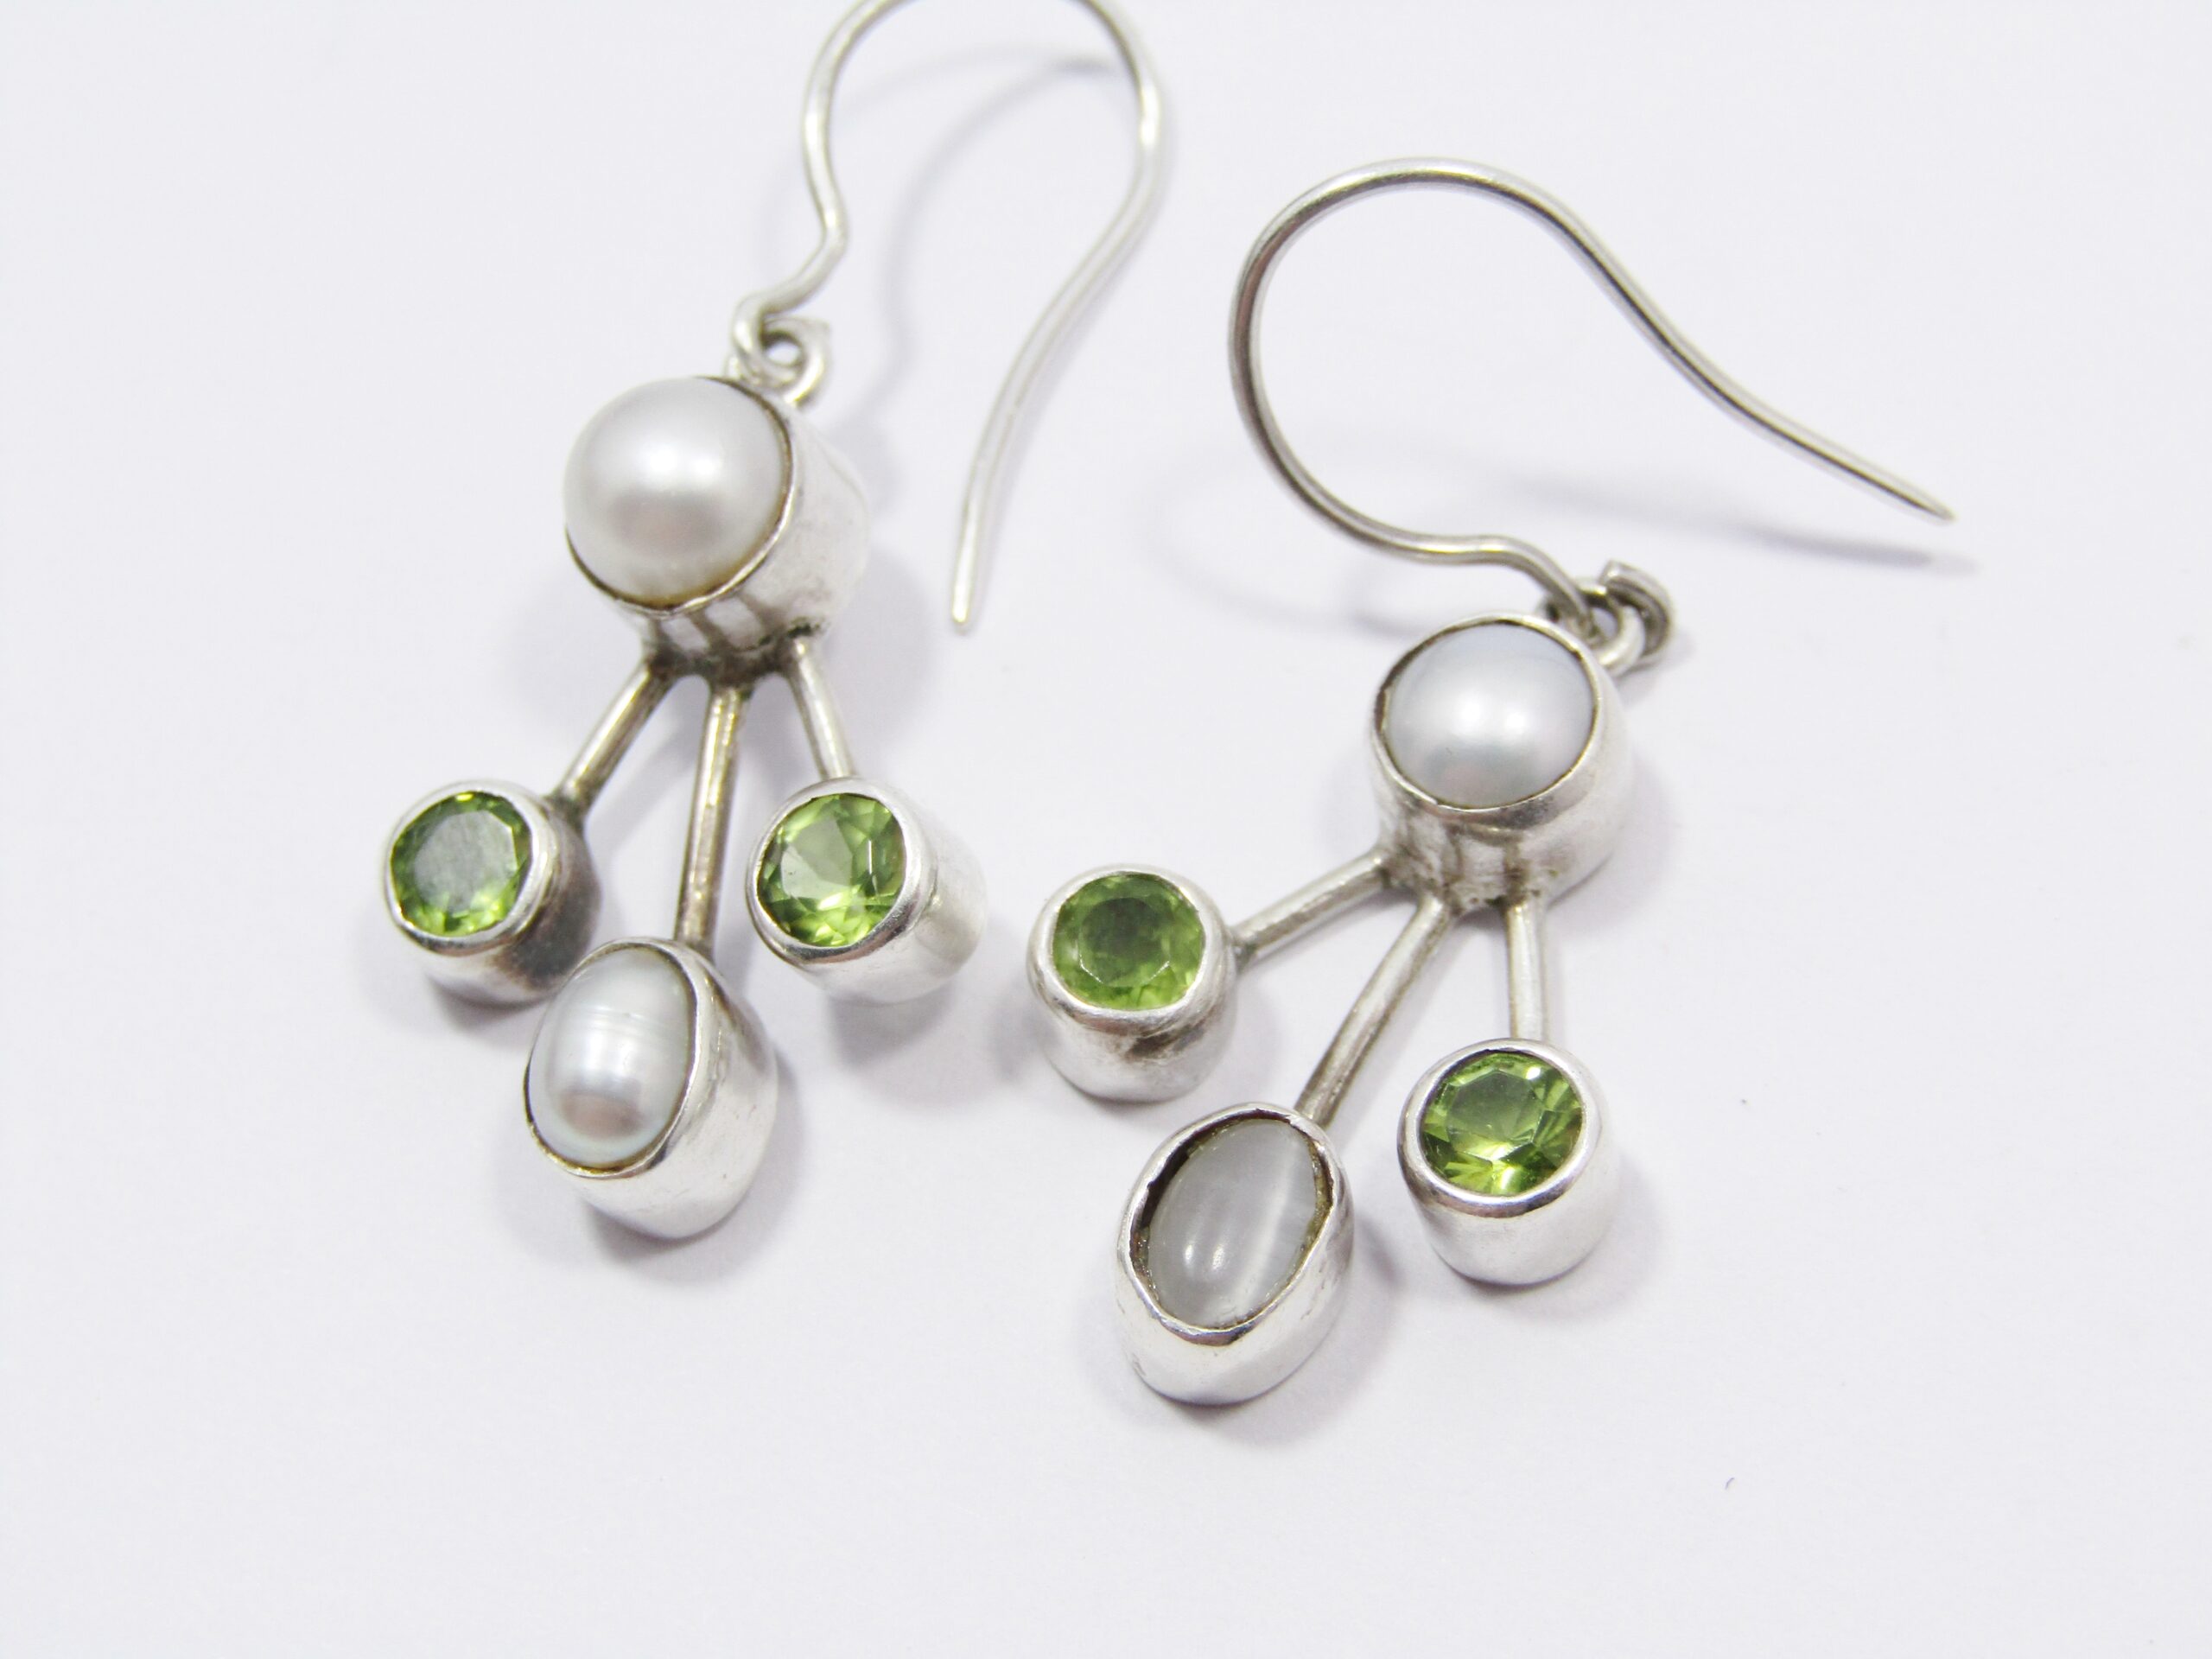 A Beautiful Pair of Peridot and Pearl Earrings in Sterling Silver.